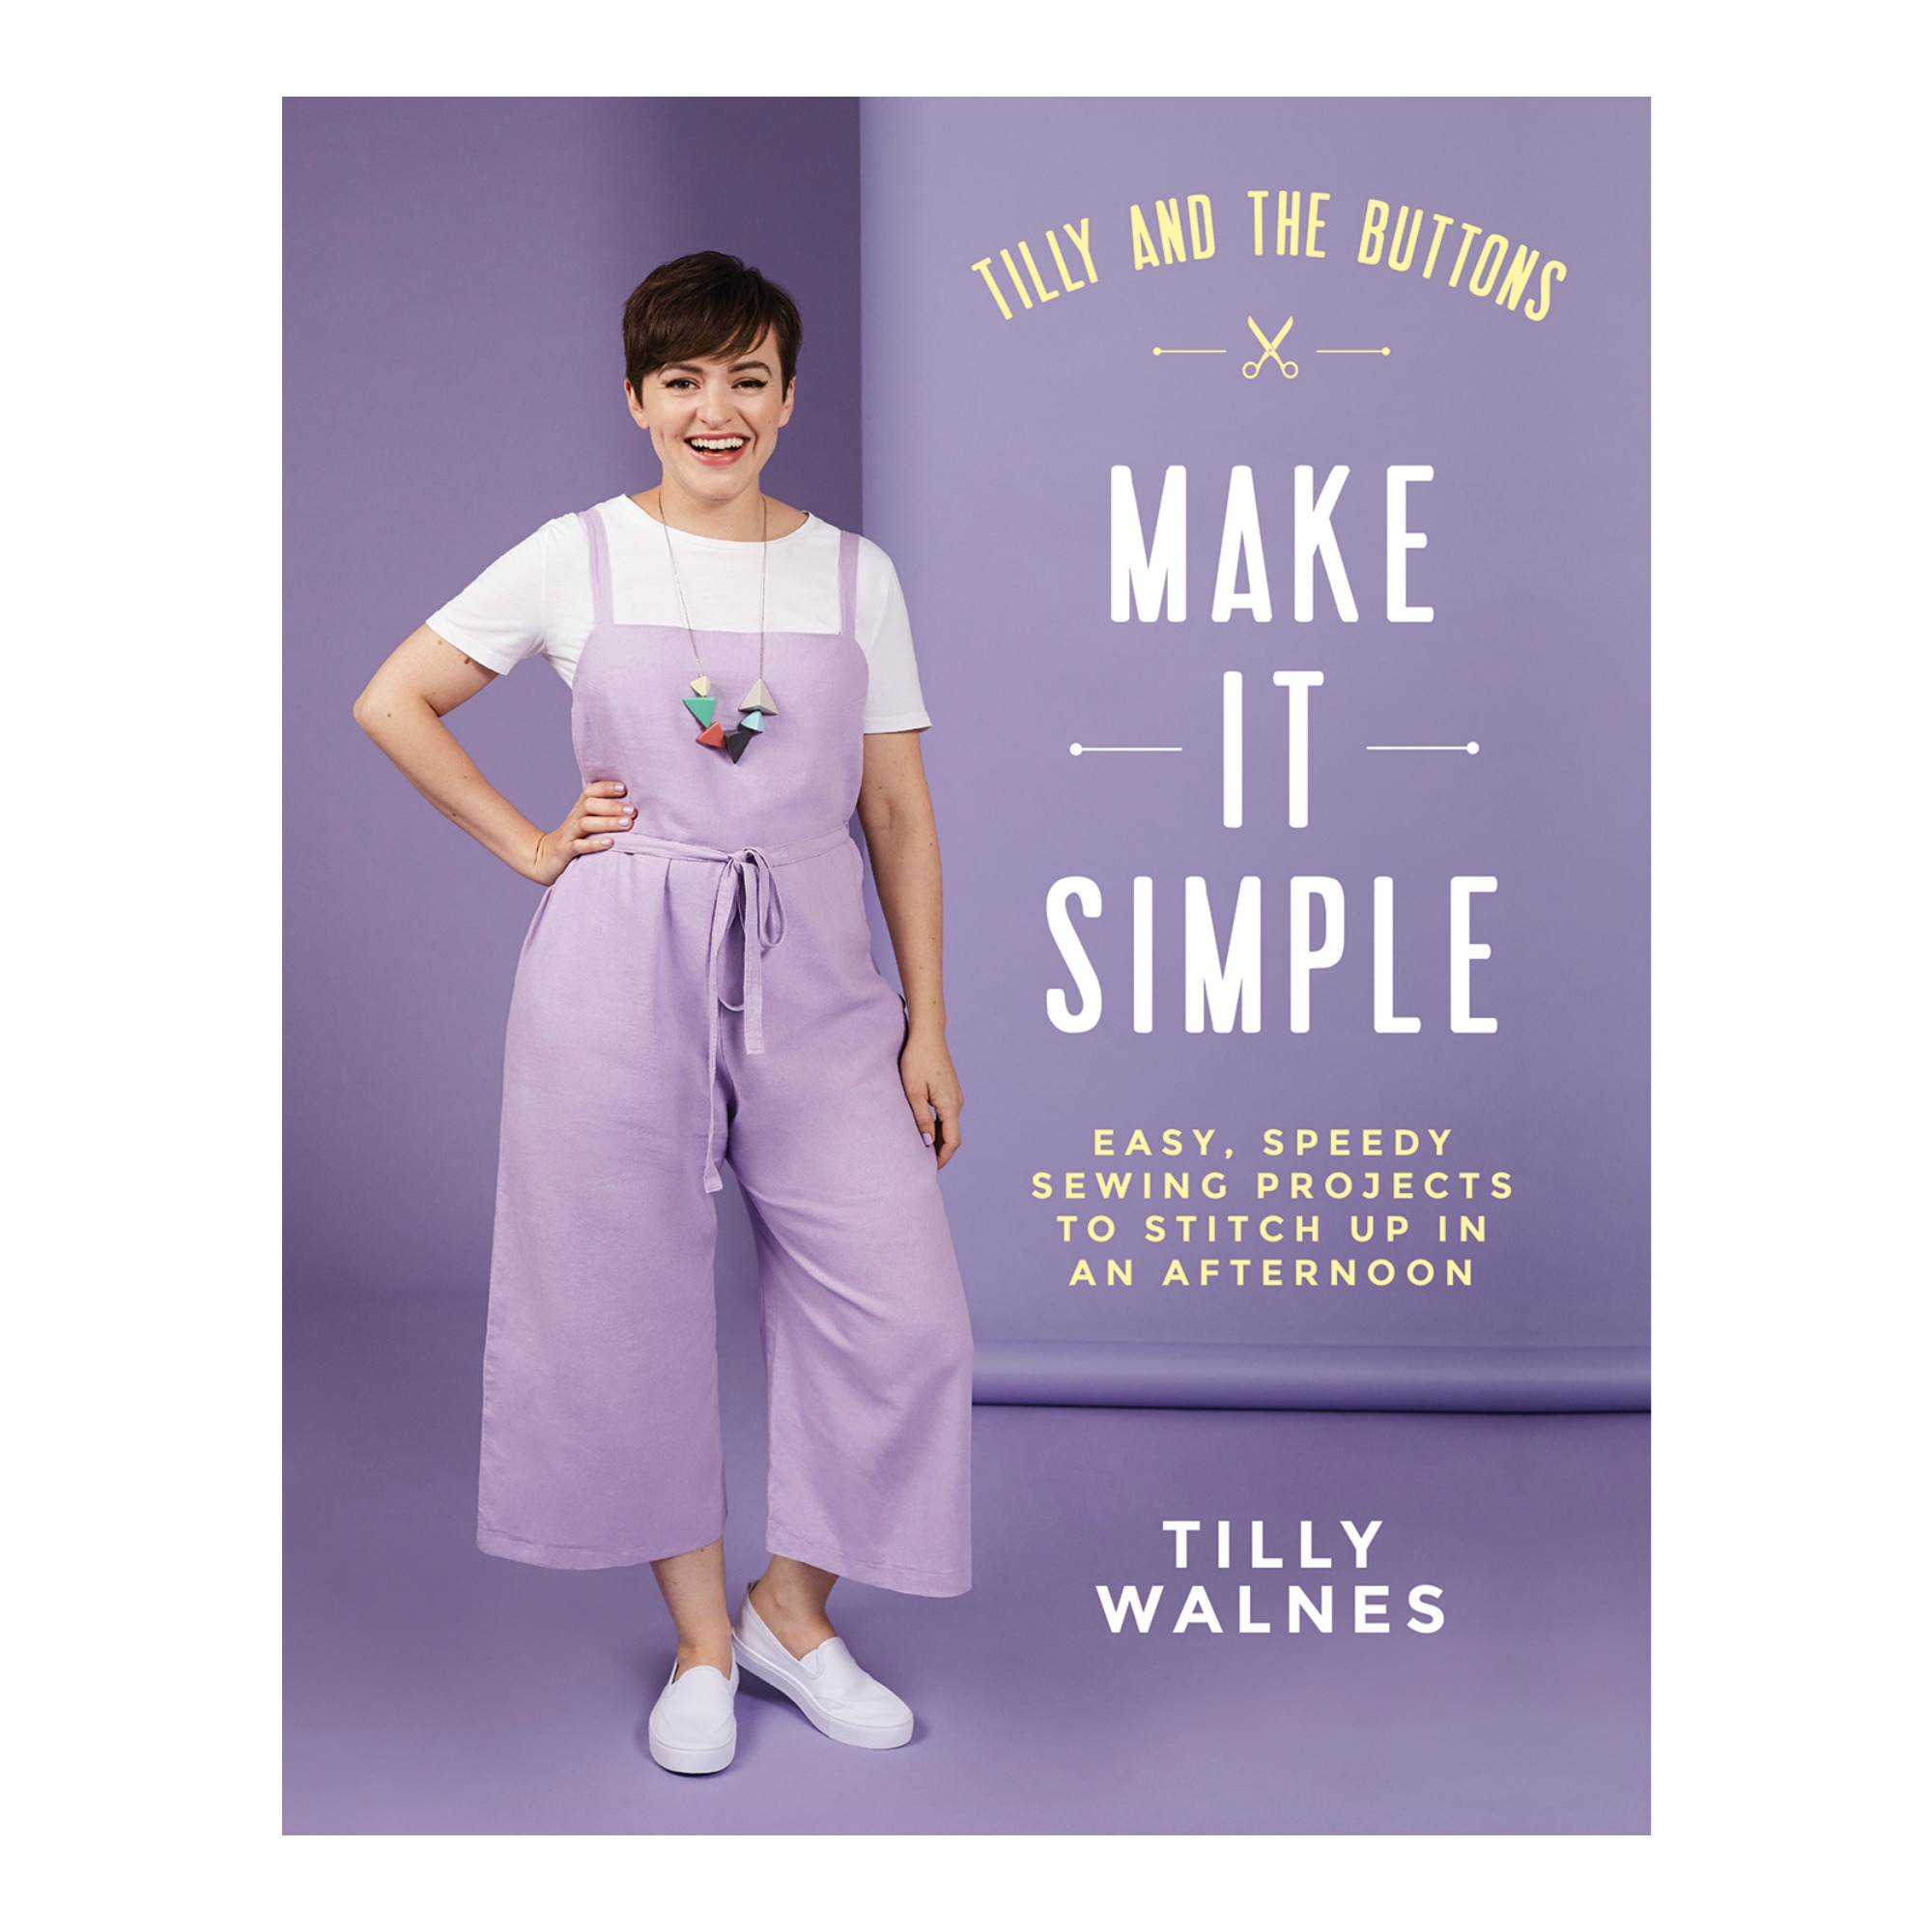 Make It Simple by Tilly Walnes